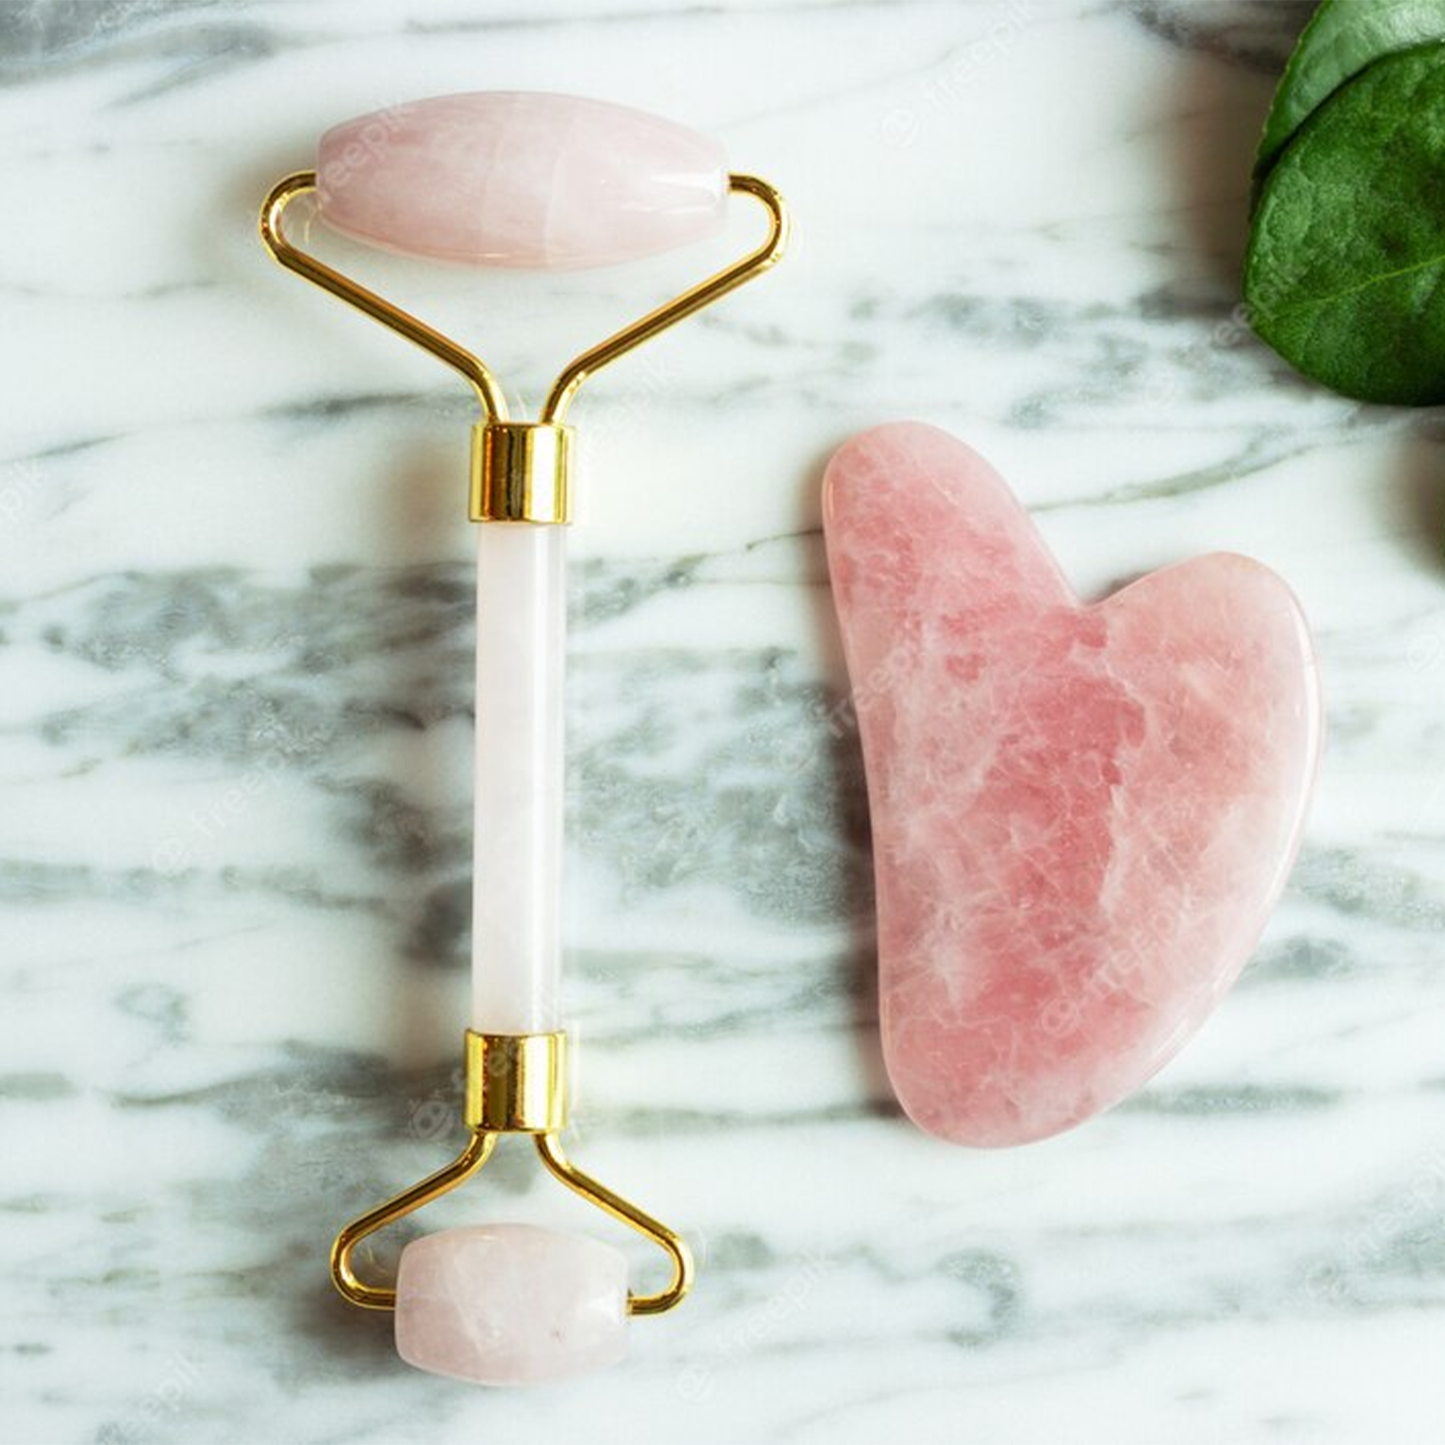 Aoxily Rose Quartz Facial Roller Aoxily CHN, Inc. All Rights Reserved.